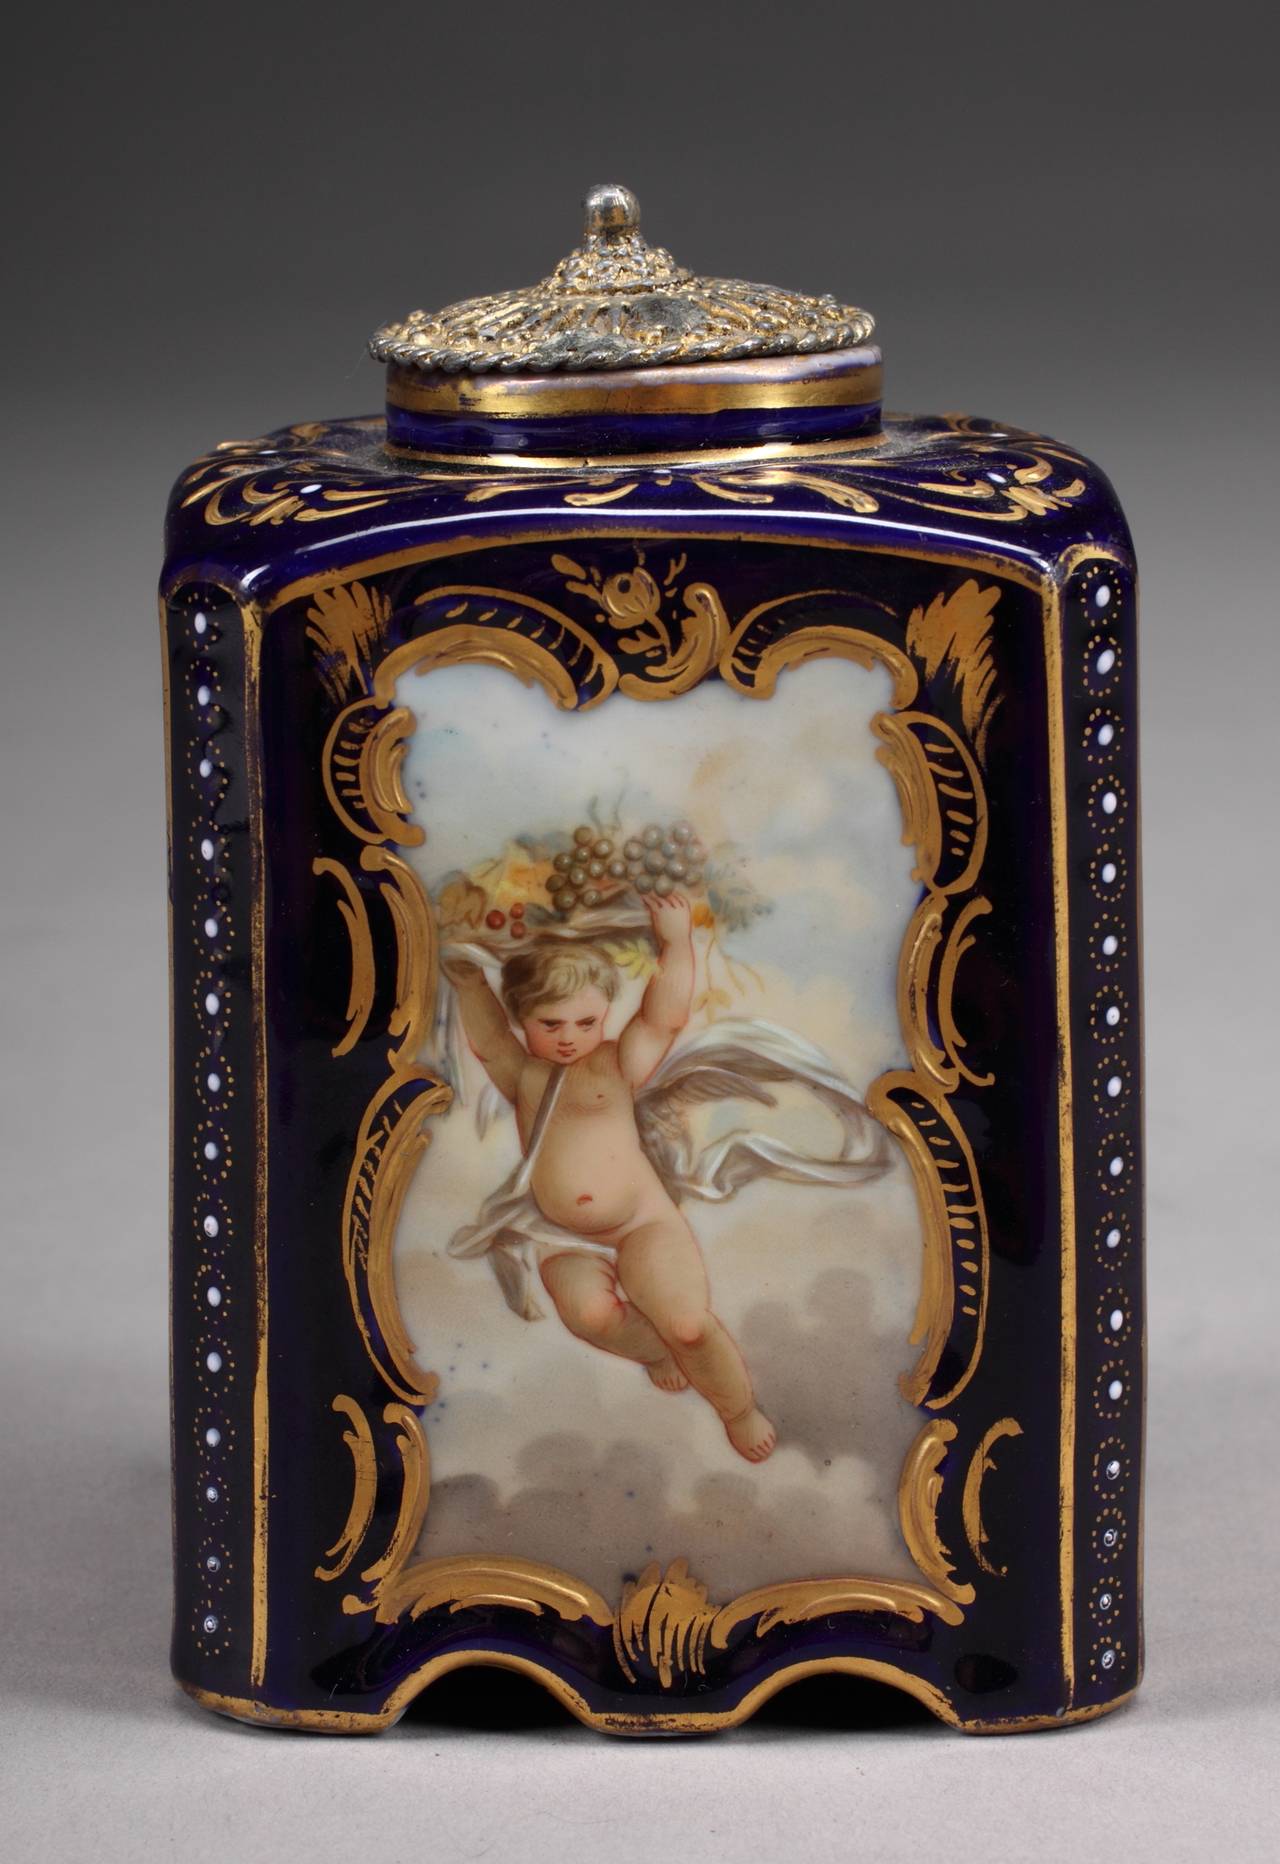 An Austrian royal Vienna style hand-painted lidded jar of Diana the huntress.

Signed: Riener.

Condition: Excellent antique condition. Age wear appropriate.

Dimensions: H: 4.5